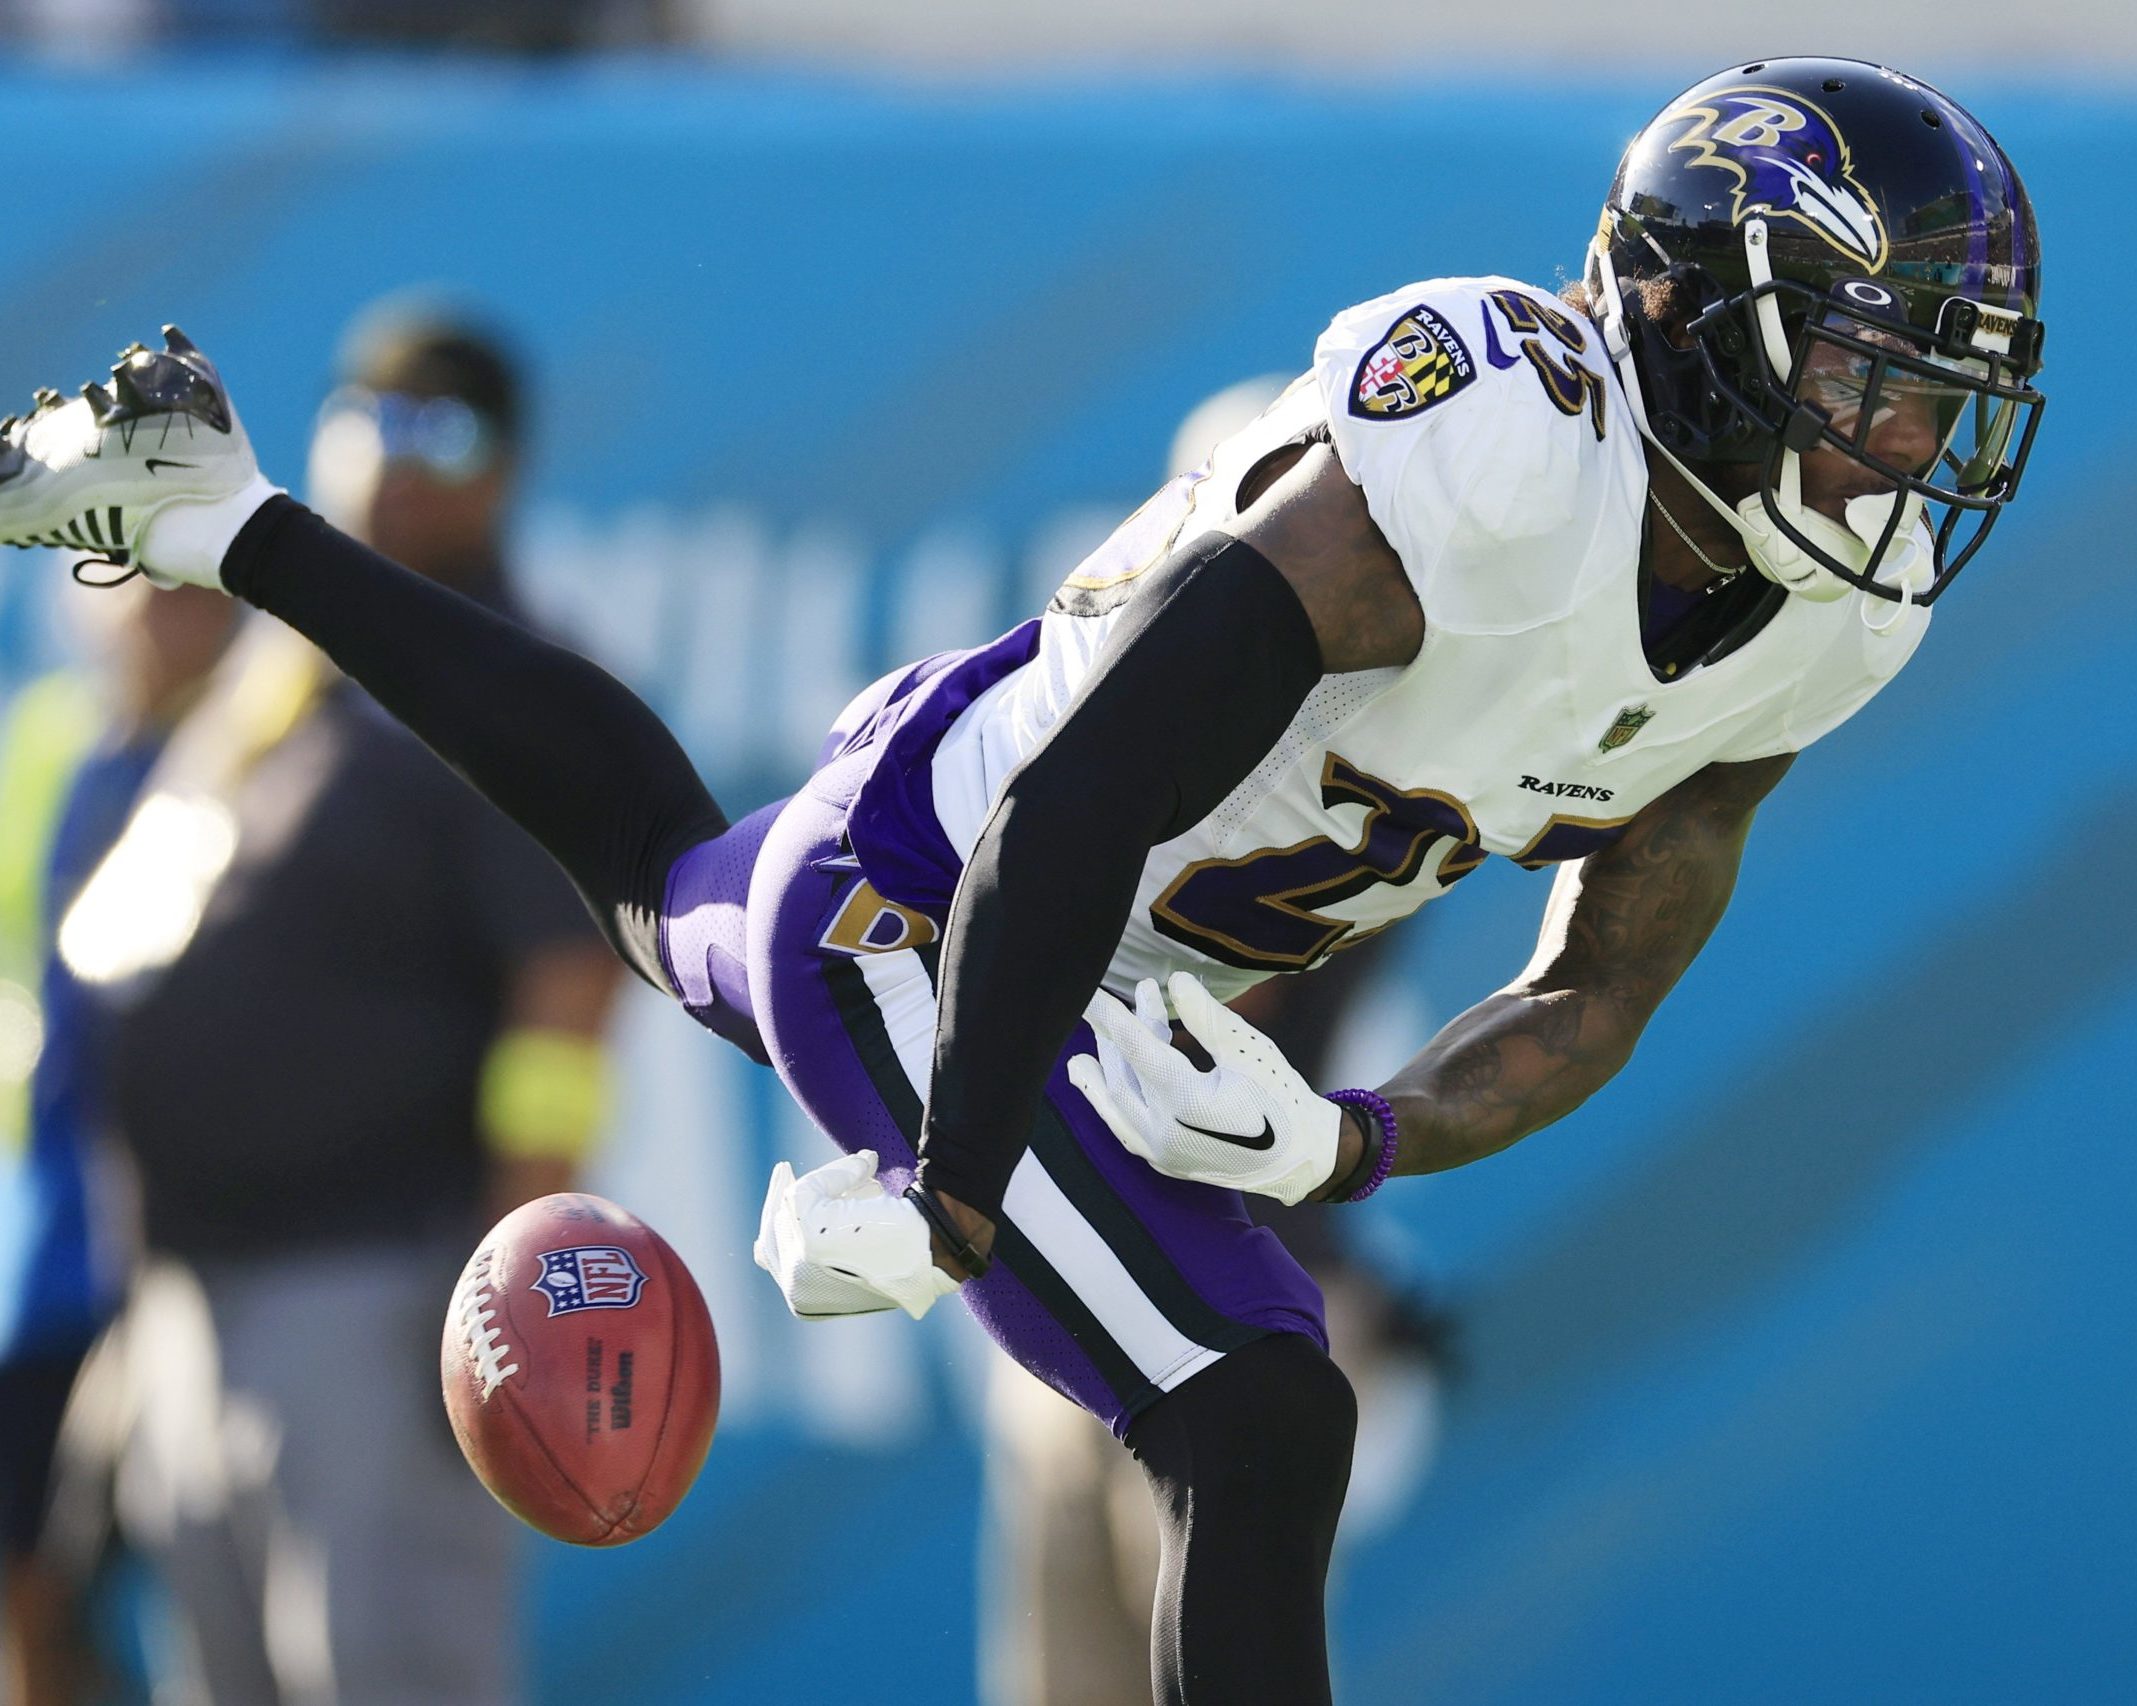 Trey Wingo: Ravens Must Find Way to Close Out Games